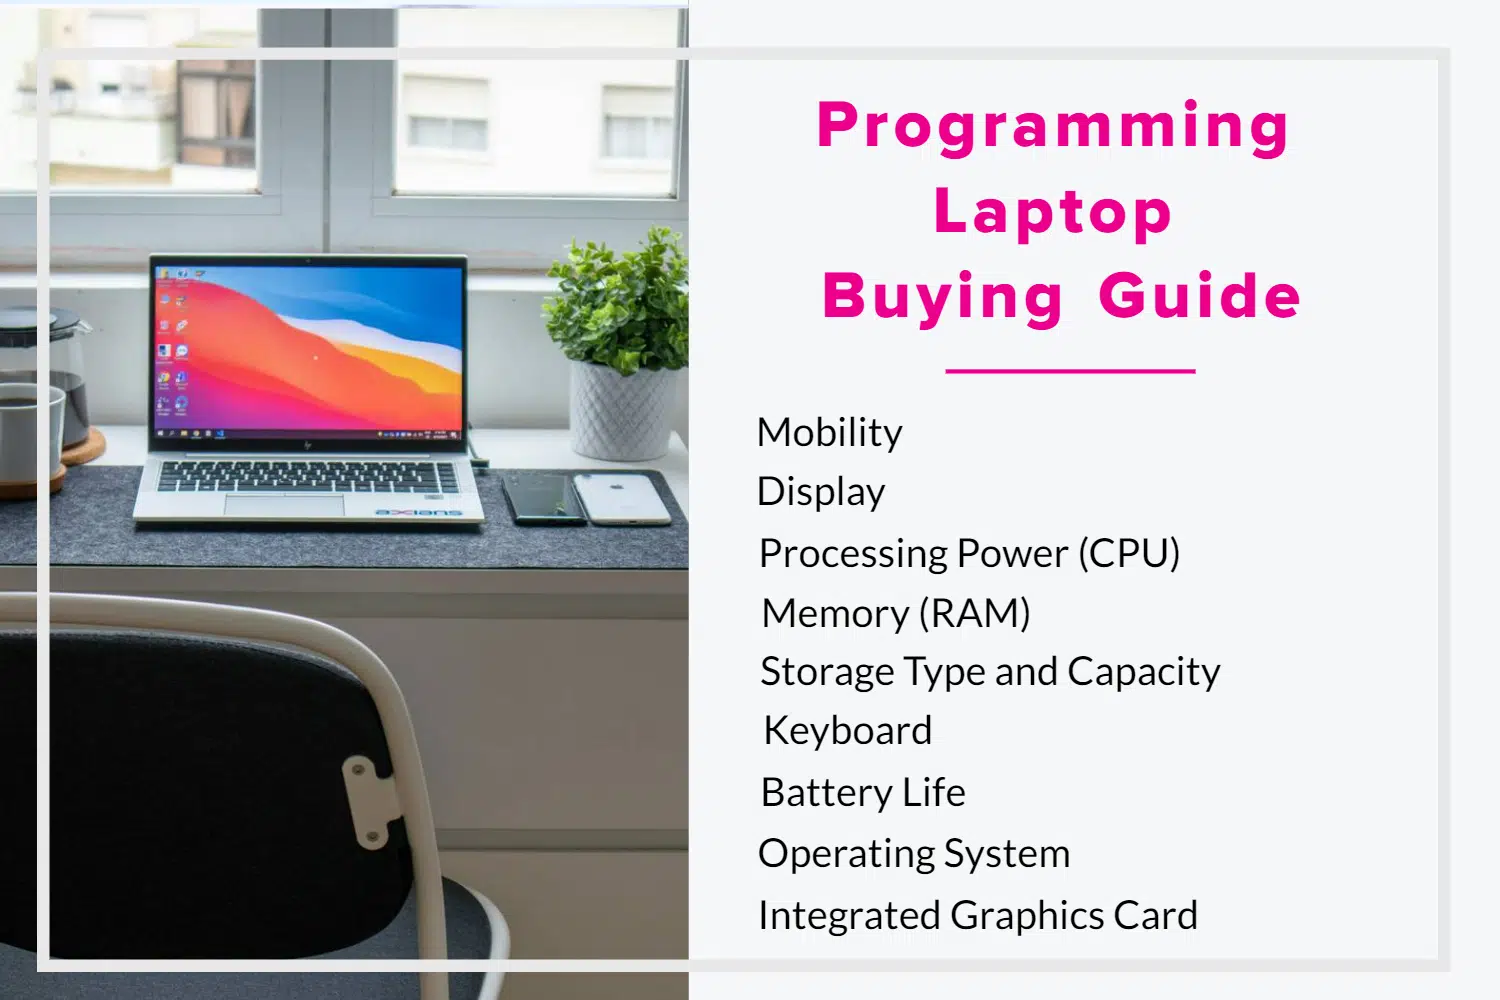 How to pick the right laptop for programming?